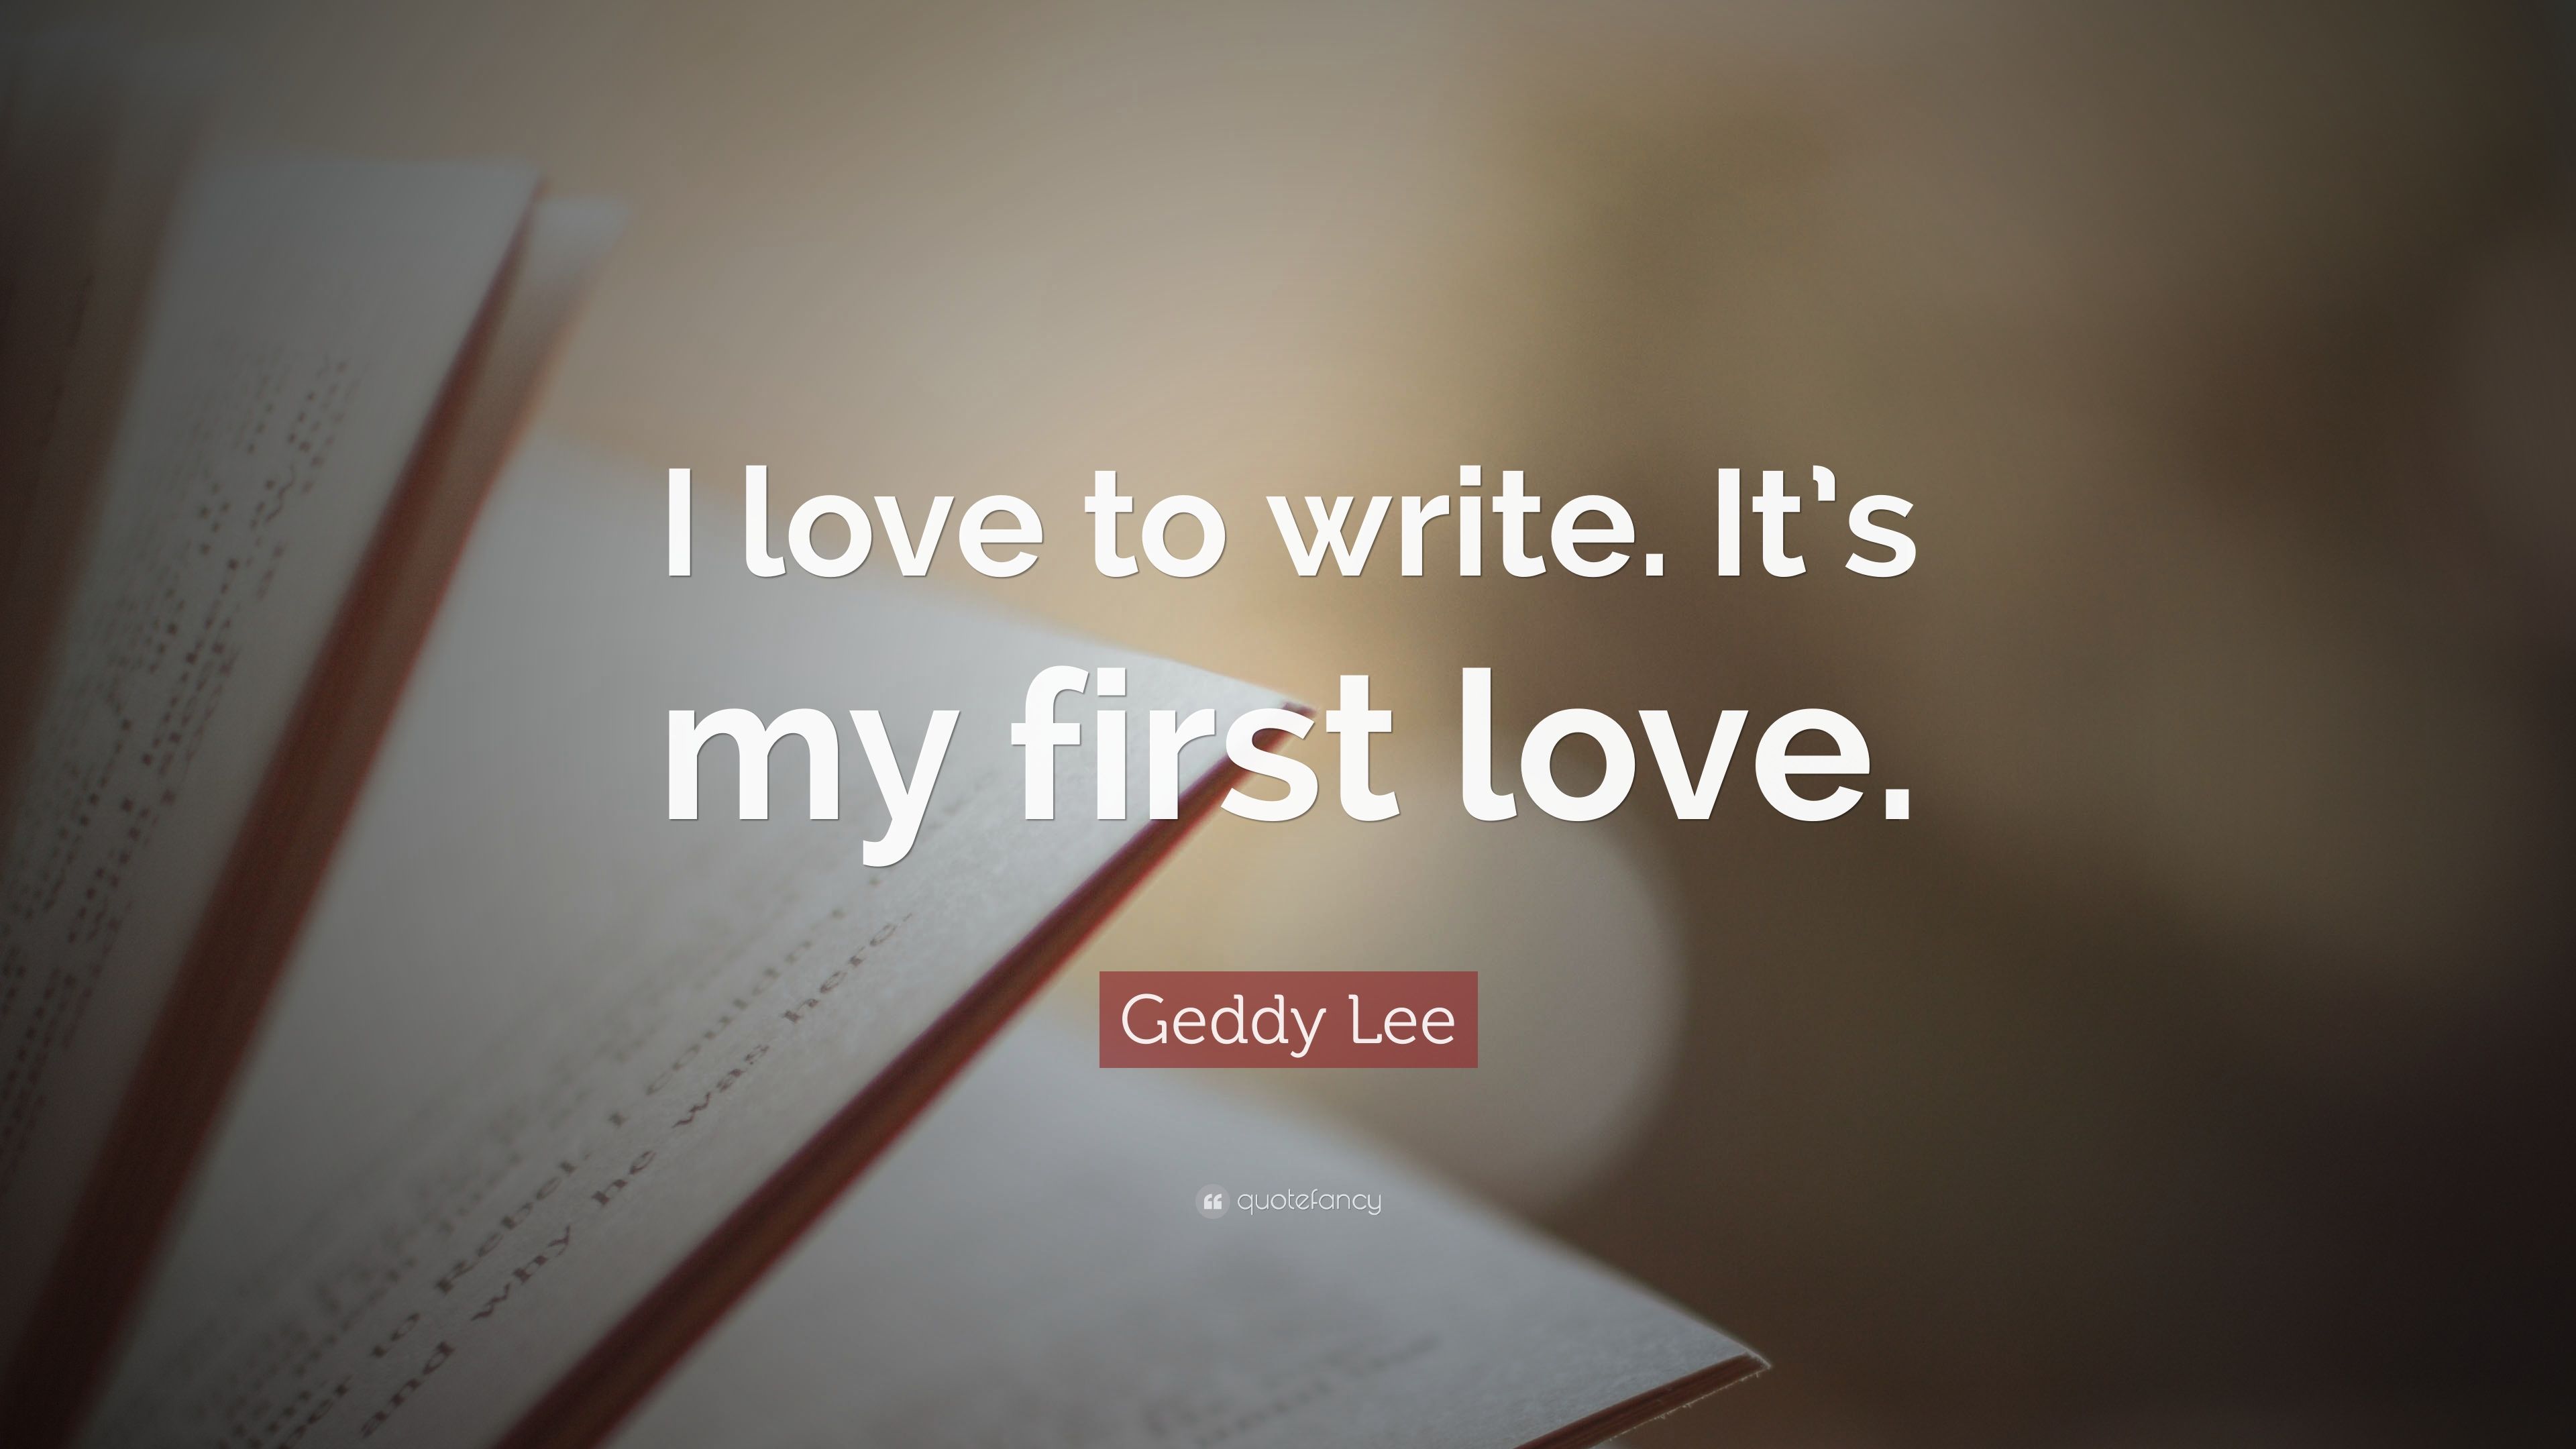 6 Geddy Lee Quotes About Love